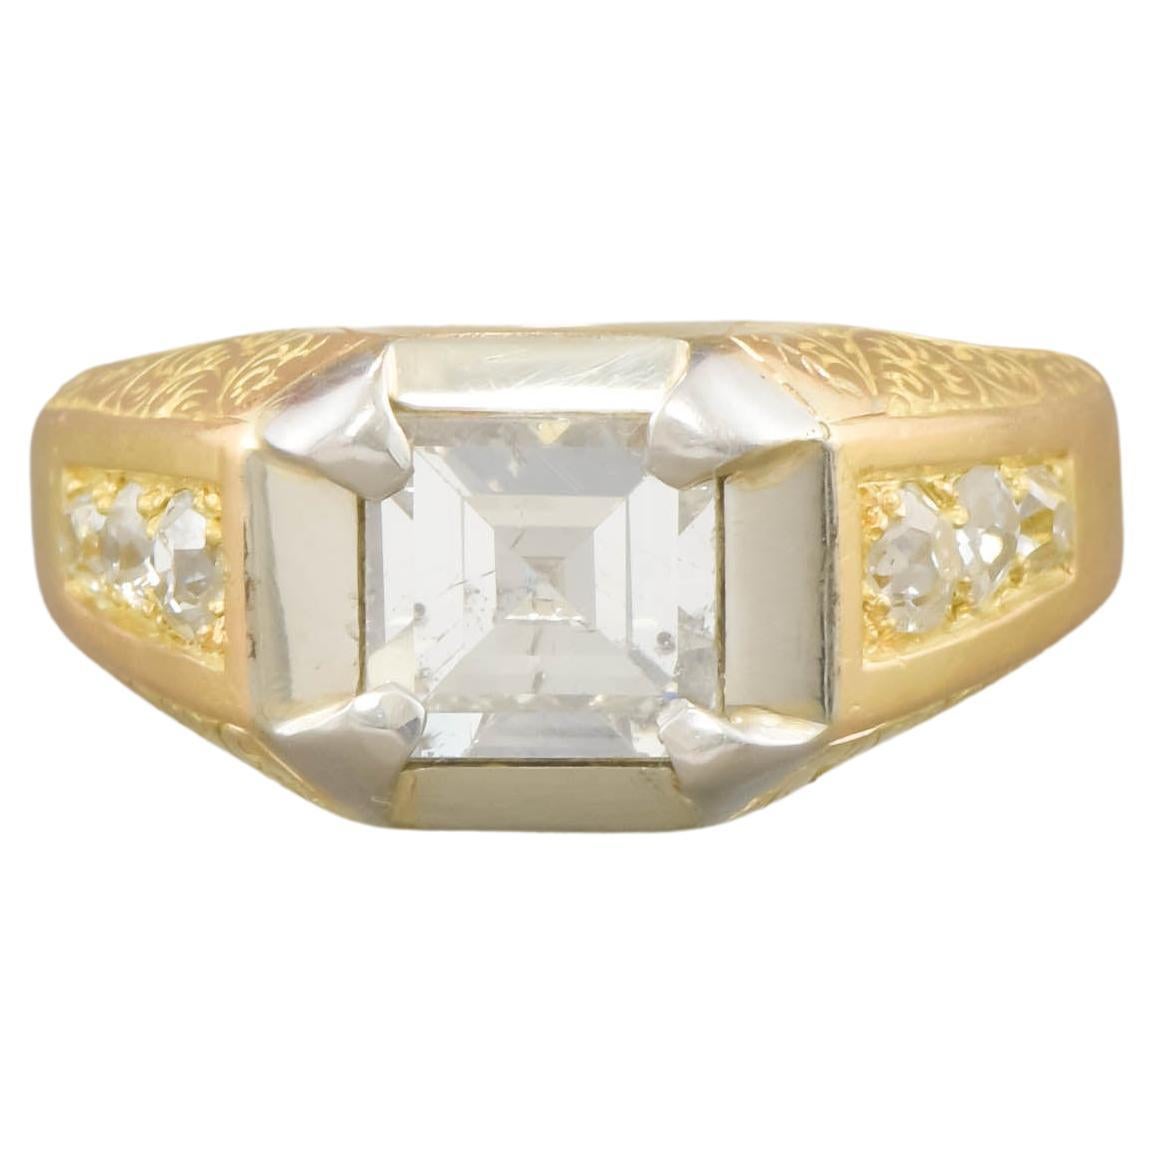 Heavy French 18K Gold Step Cut Diamond Ring with Hand Engraving, 1.73 ctw For Sale